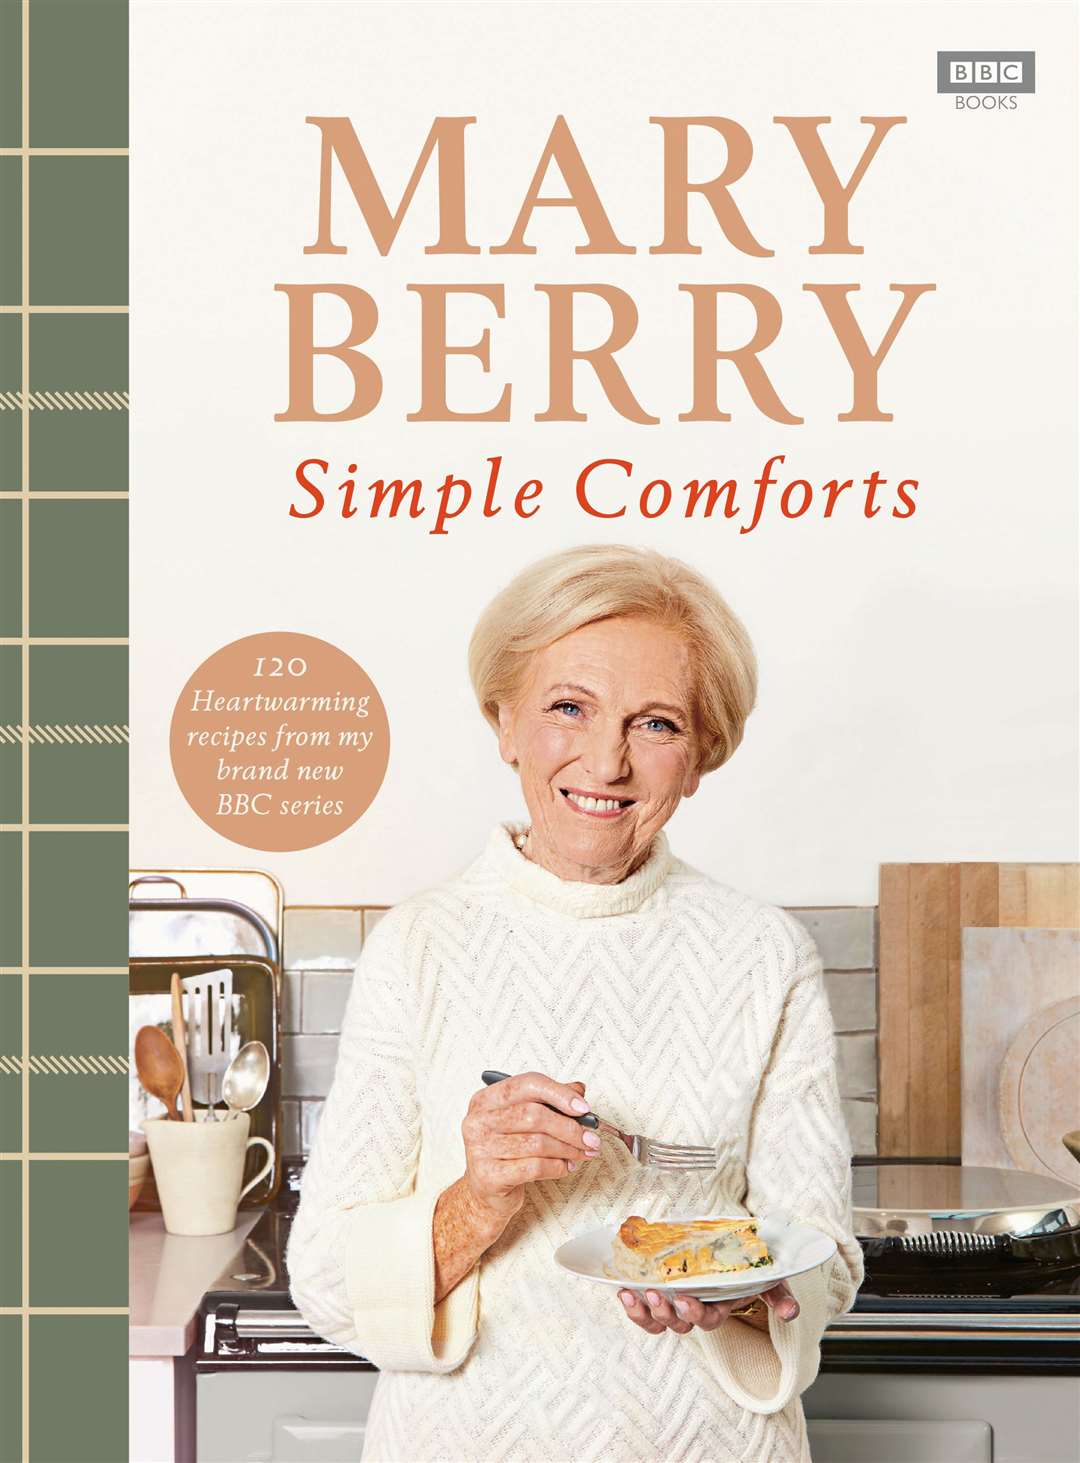 Simple Comforts by Mary Berry (BBC Books, £26). Picture: Laura Edwards/PA